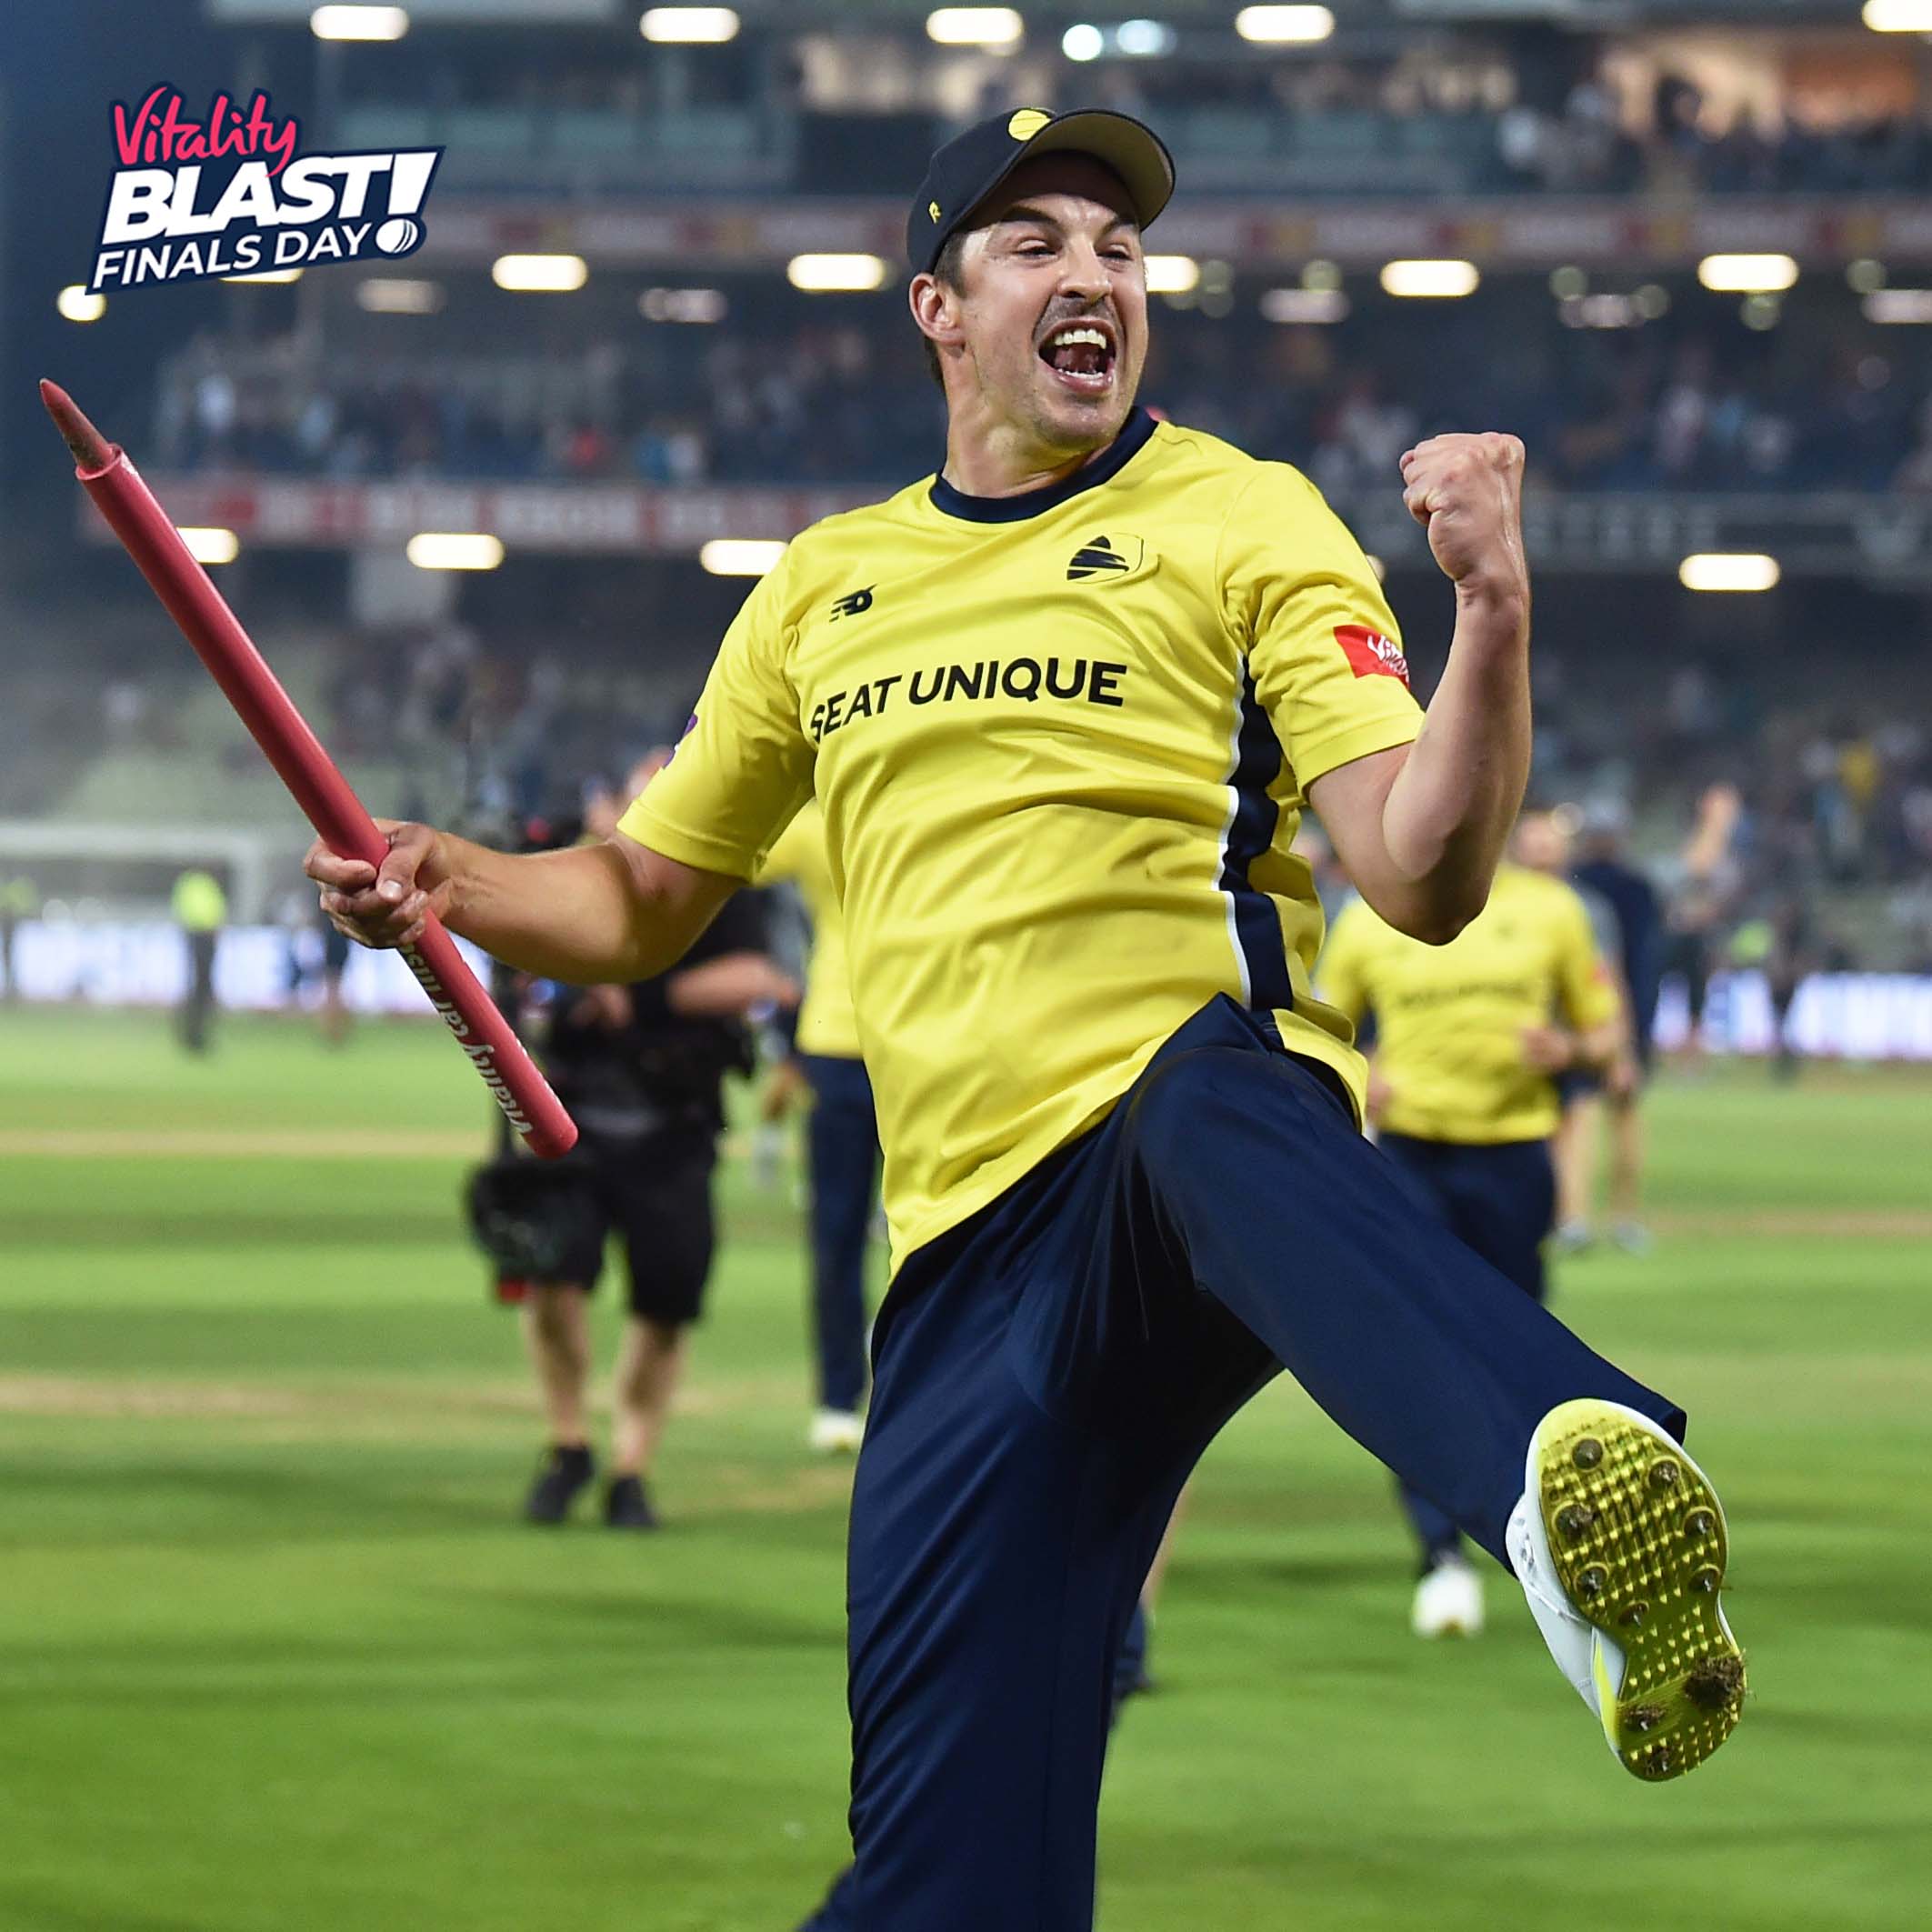 WATCH | Final delivery no-ball drama leads to a thrilling finish to the Natwest T20 Vitality Blast title clash